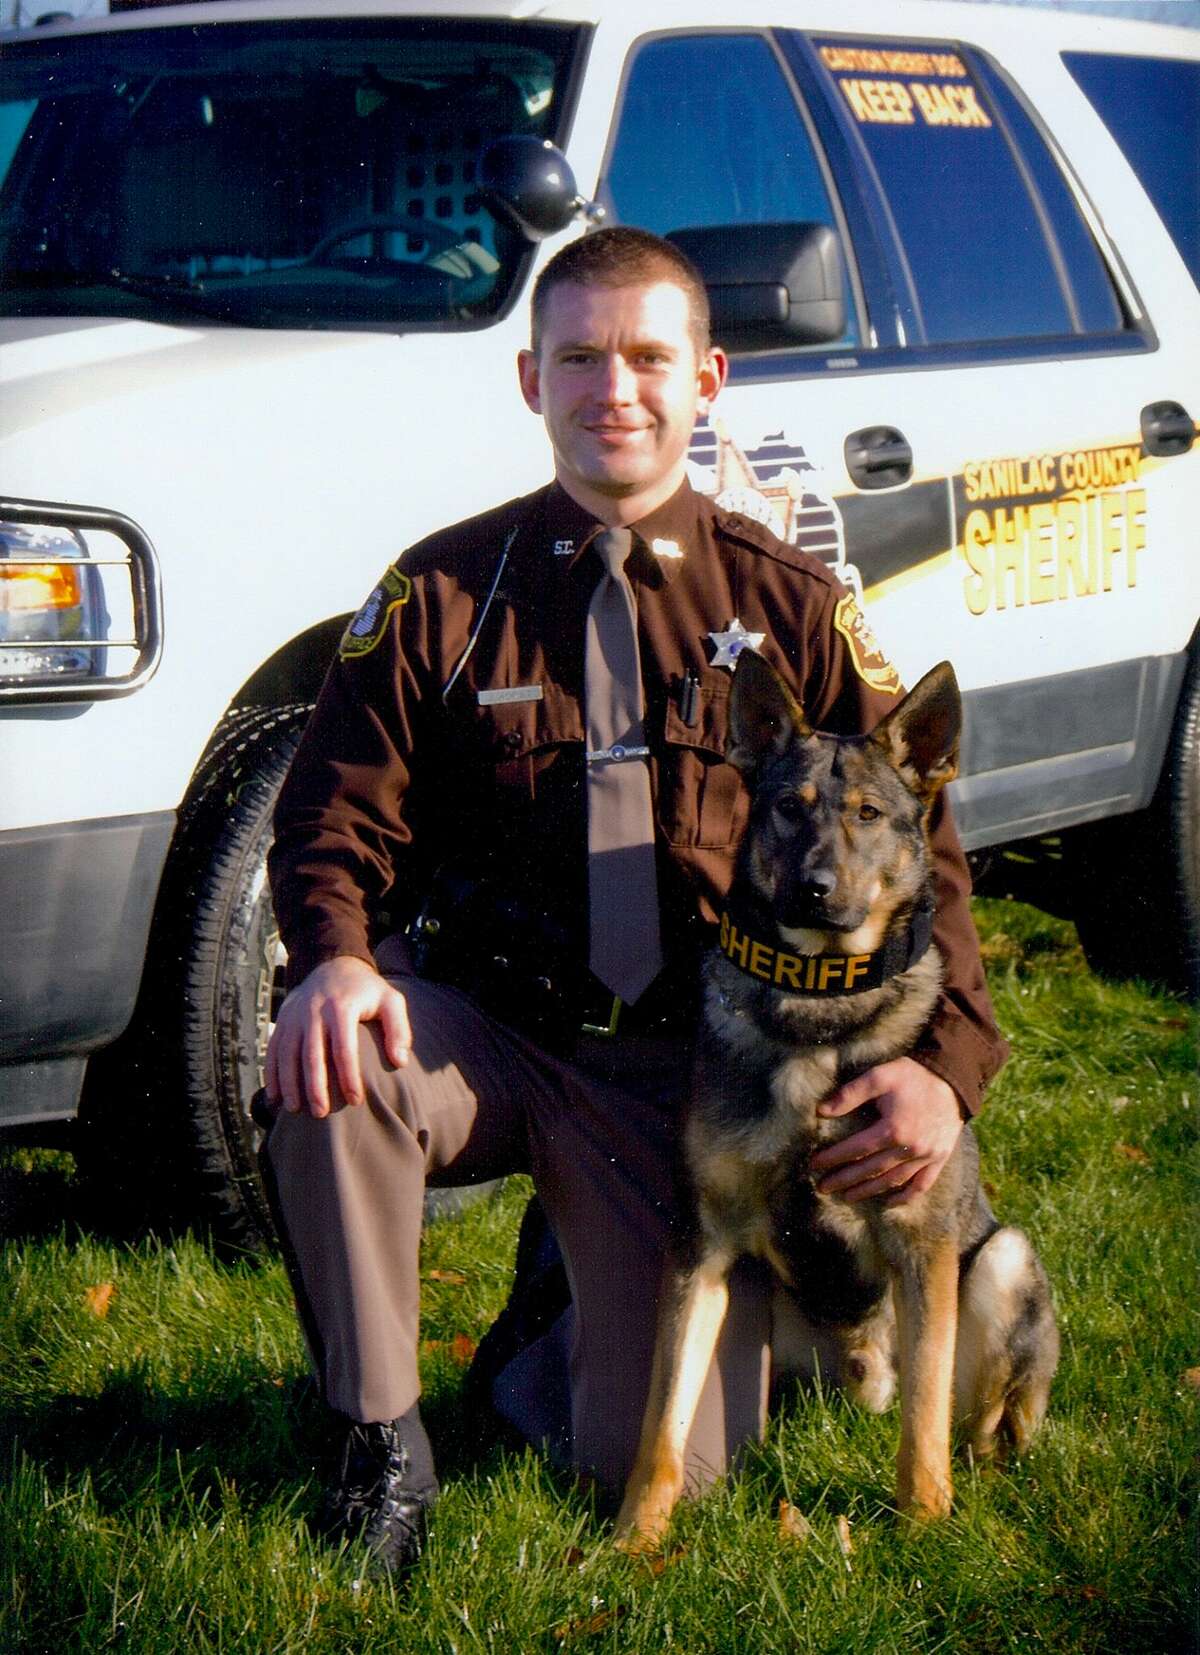 The Sanilac County Sheriff’s Office is mourning the loss of one its own. After enjoying just one year of retirement, K-9 officer Baki passed away on Jan. 1. Baki was a dual-purpose patrol dog who was trained in explosives detection, tracking and protection. 